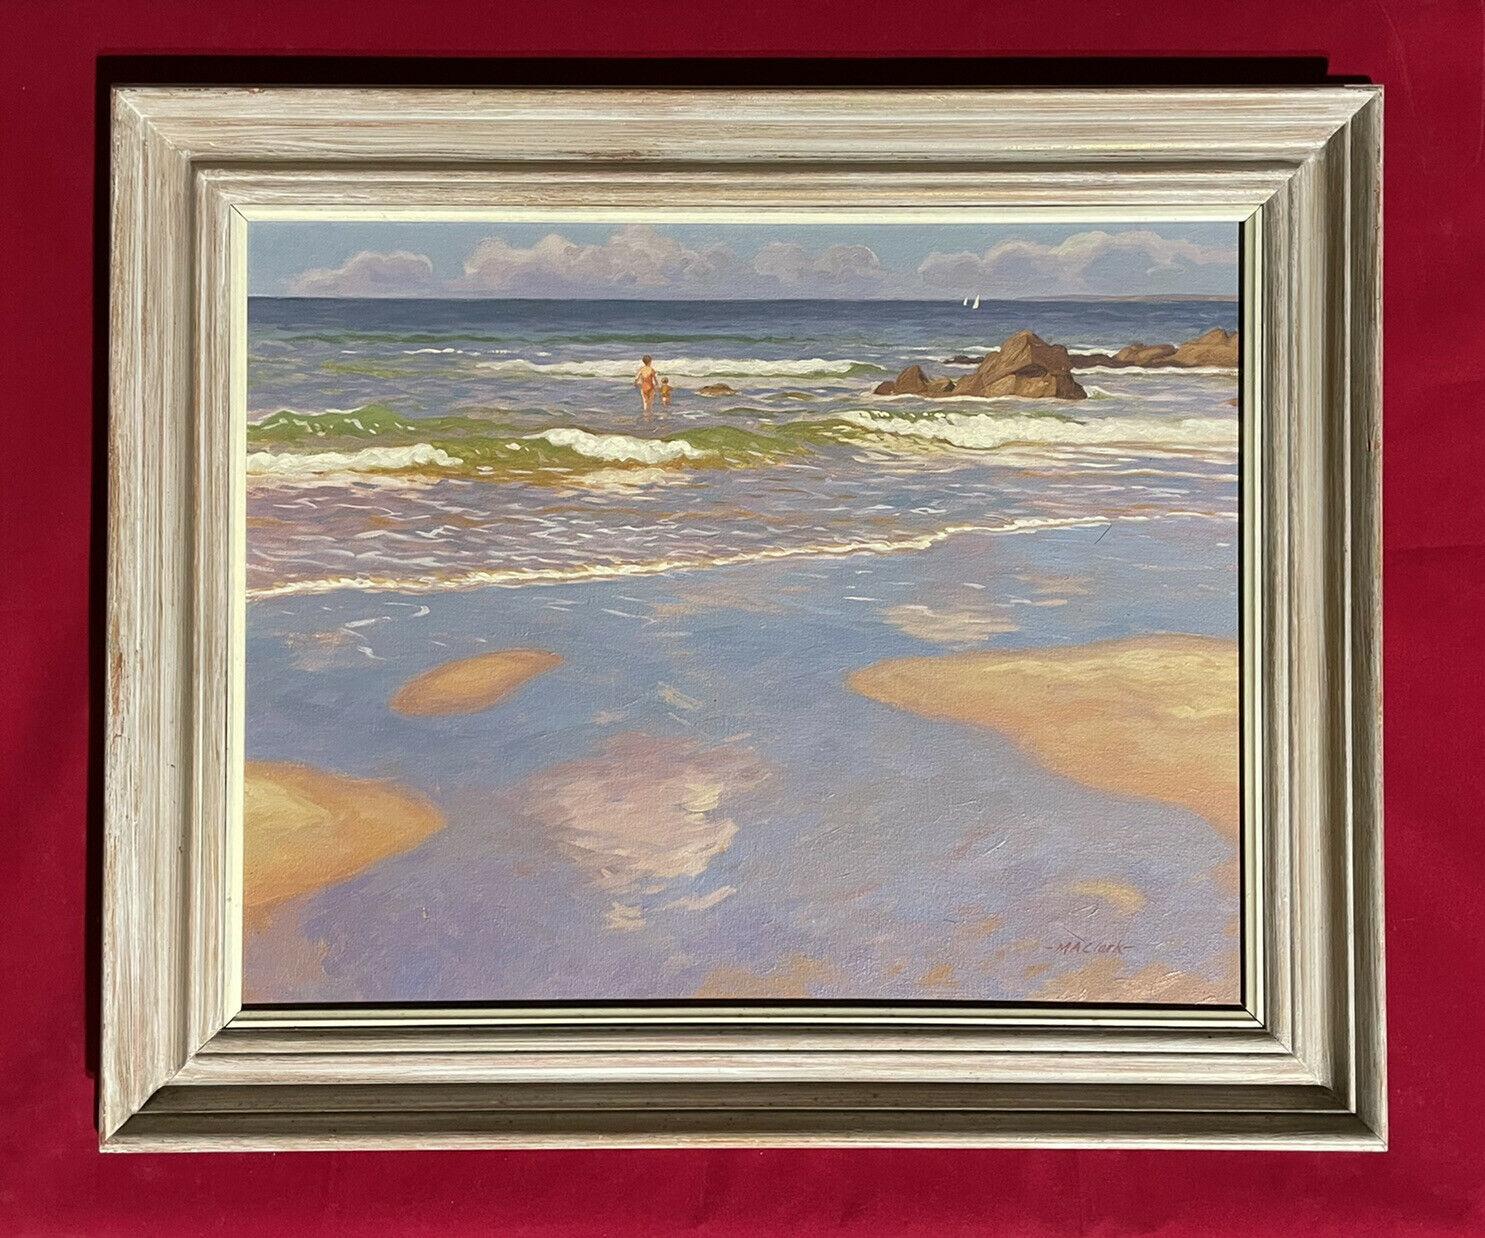 FINE MODERN BRITISH SIGNED OIL PAINTING - CHILDREN PLAYING IN SURF ON BEACH - Painting by M. Clark